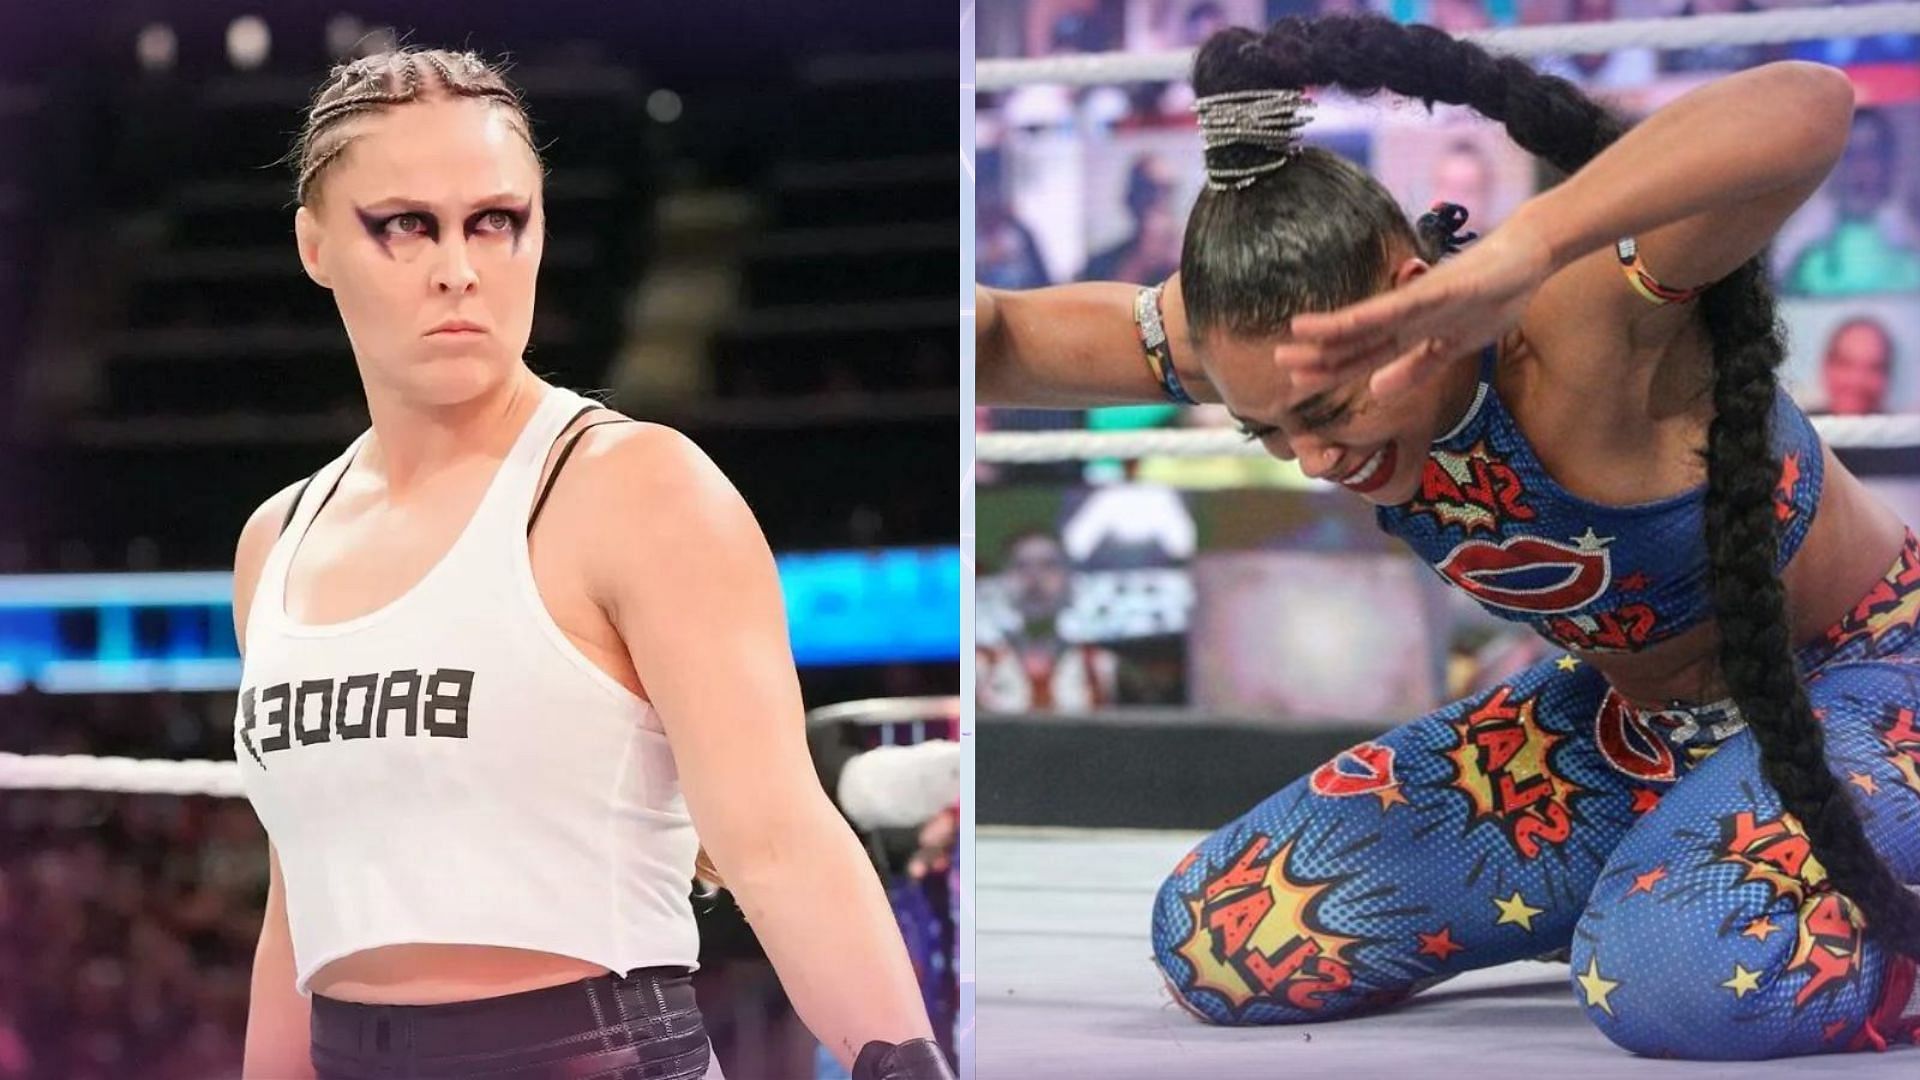 Could Ronda Rousey dethrone Bianca Belair and become the WWE RAW Women